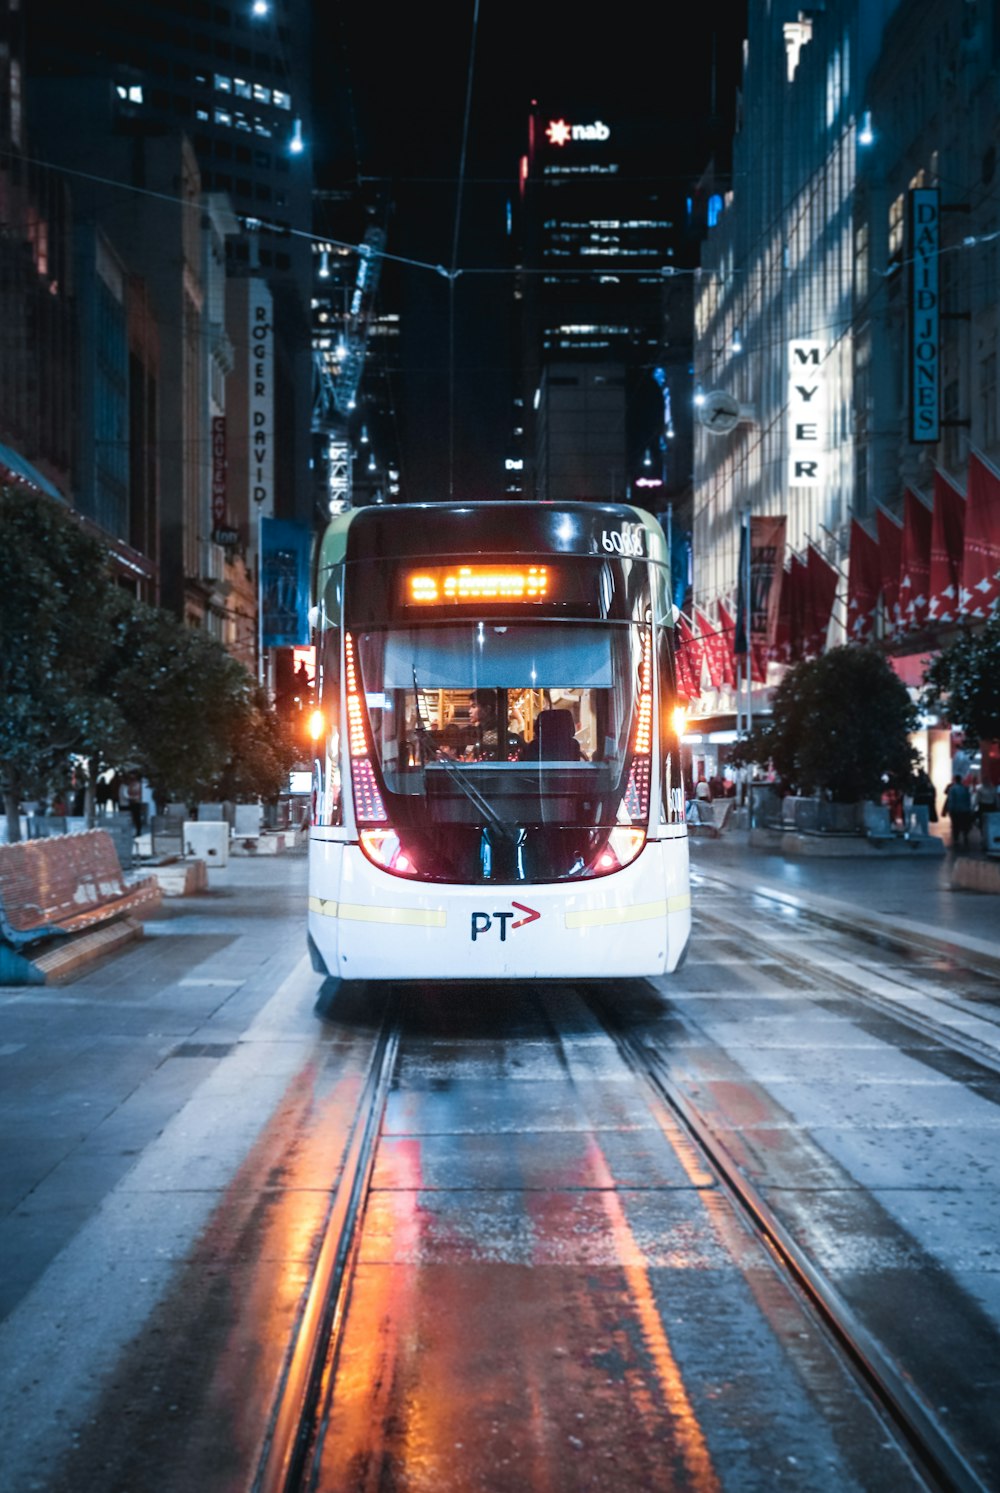 white and brown tram on road during night time